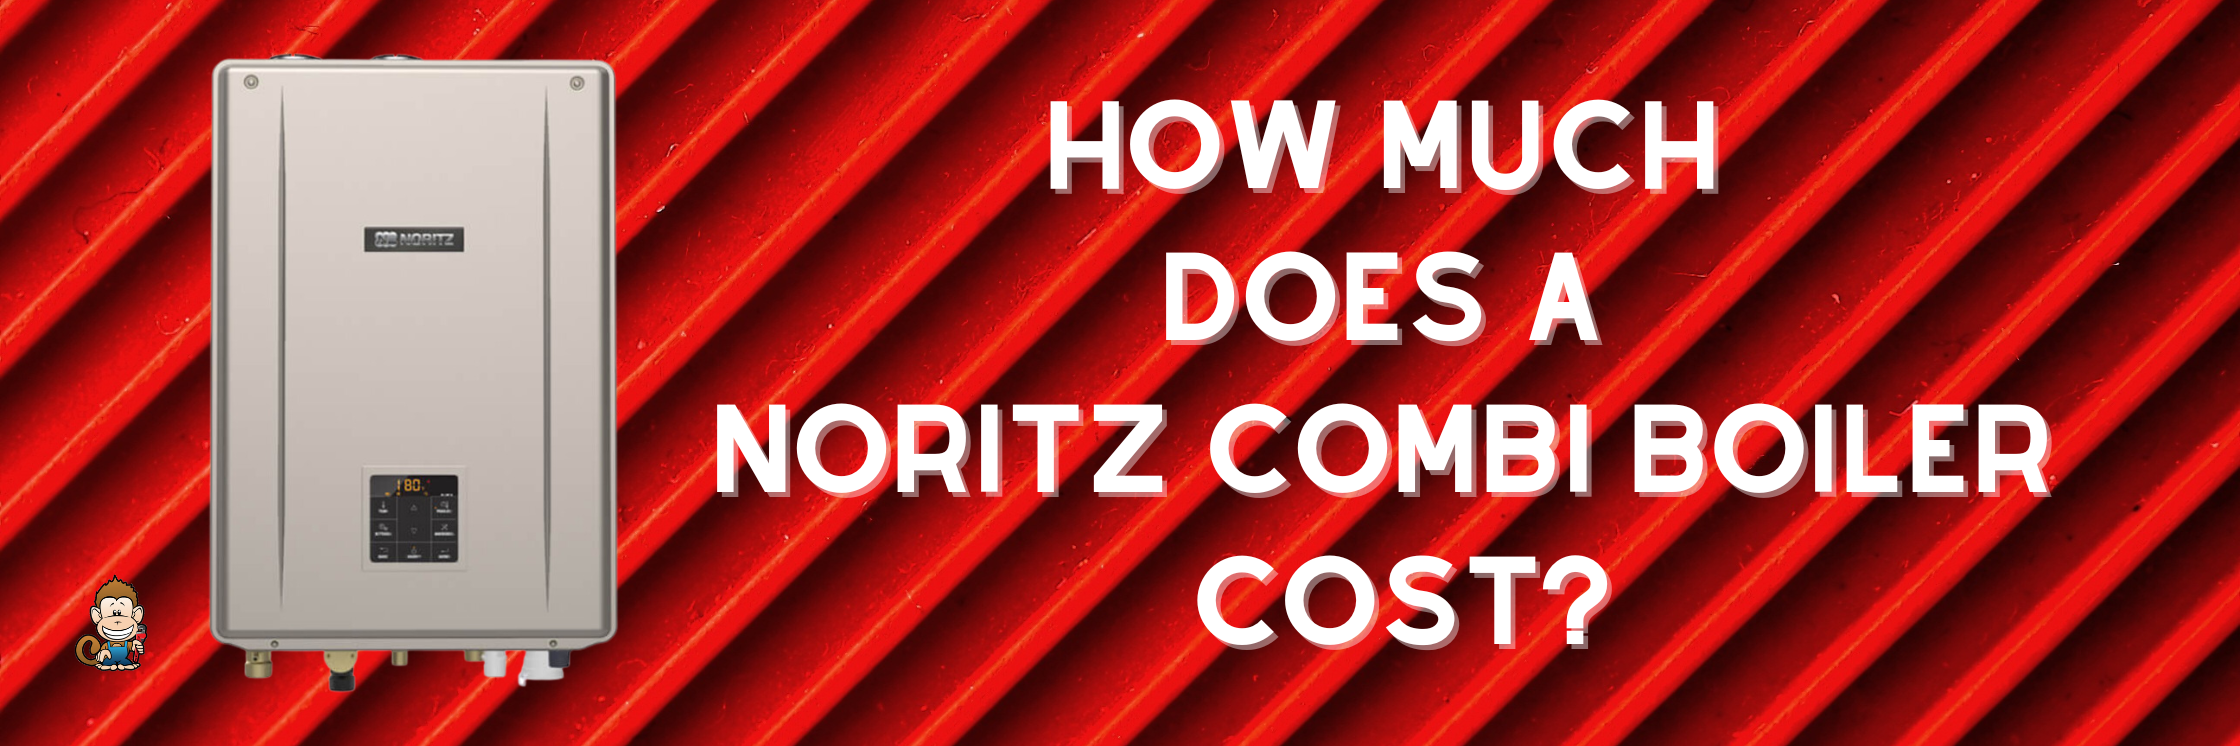 How Much Does a Noritz Combi Boiler Cost?